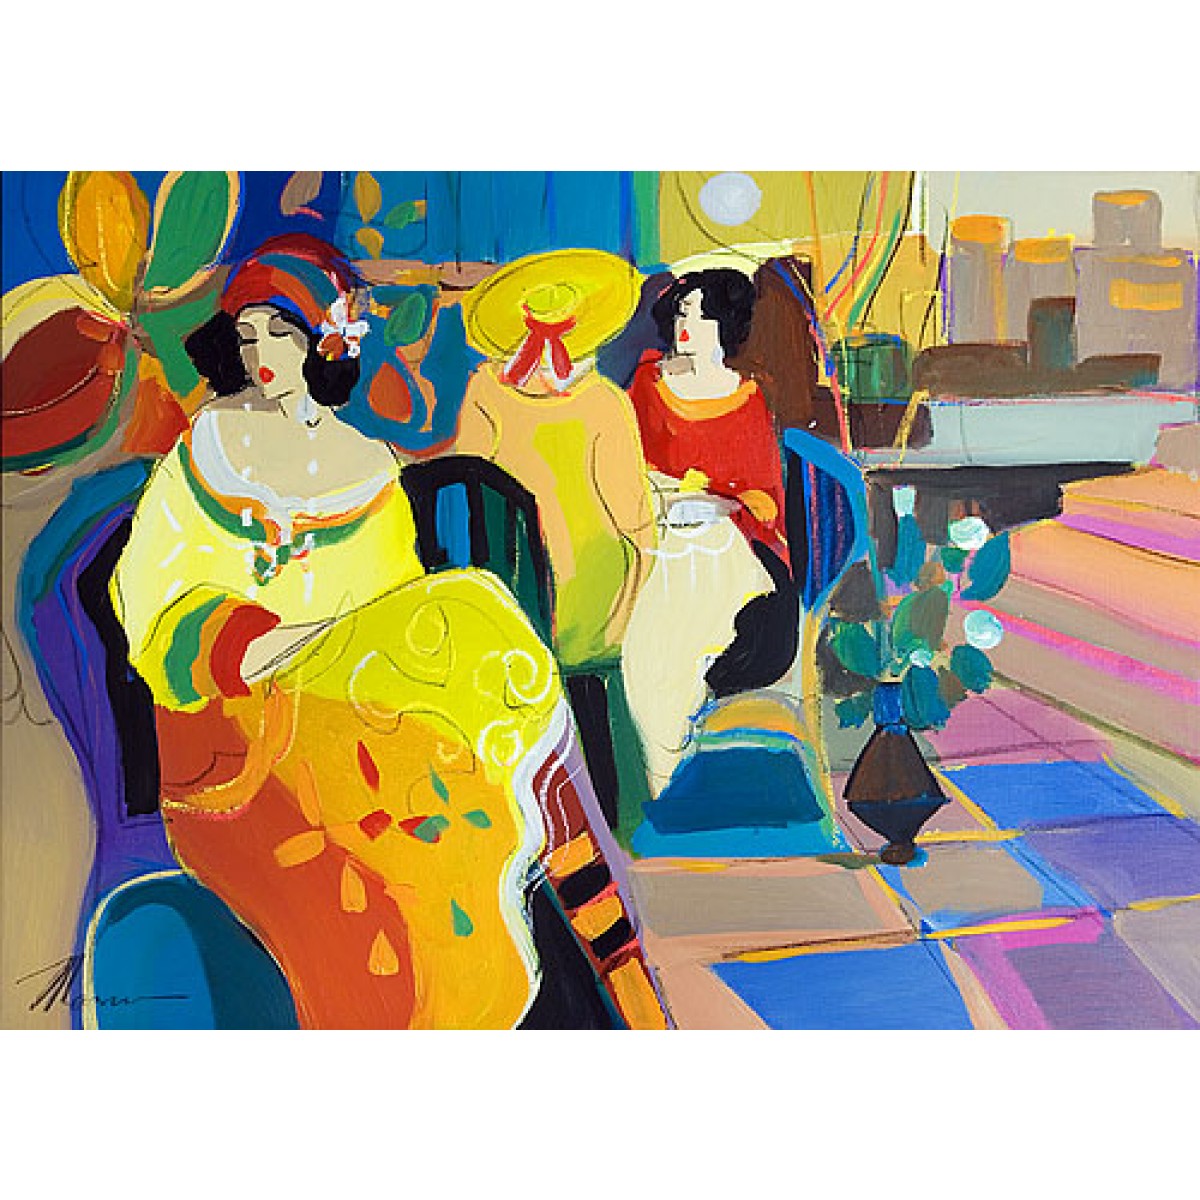 Women at a Cafe by Isaac Maimon